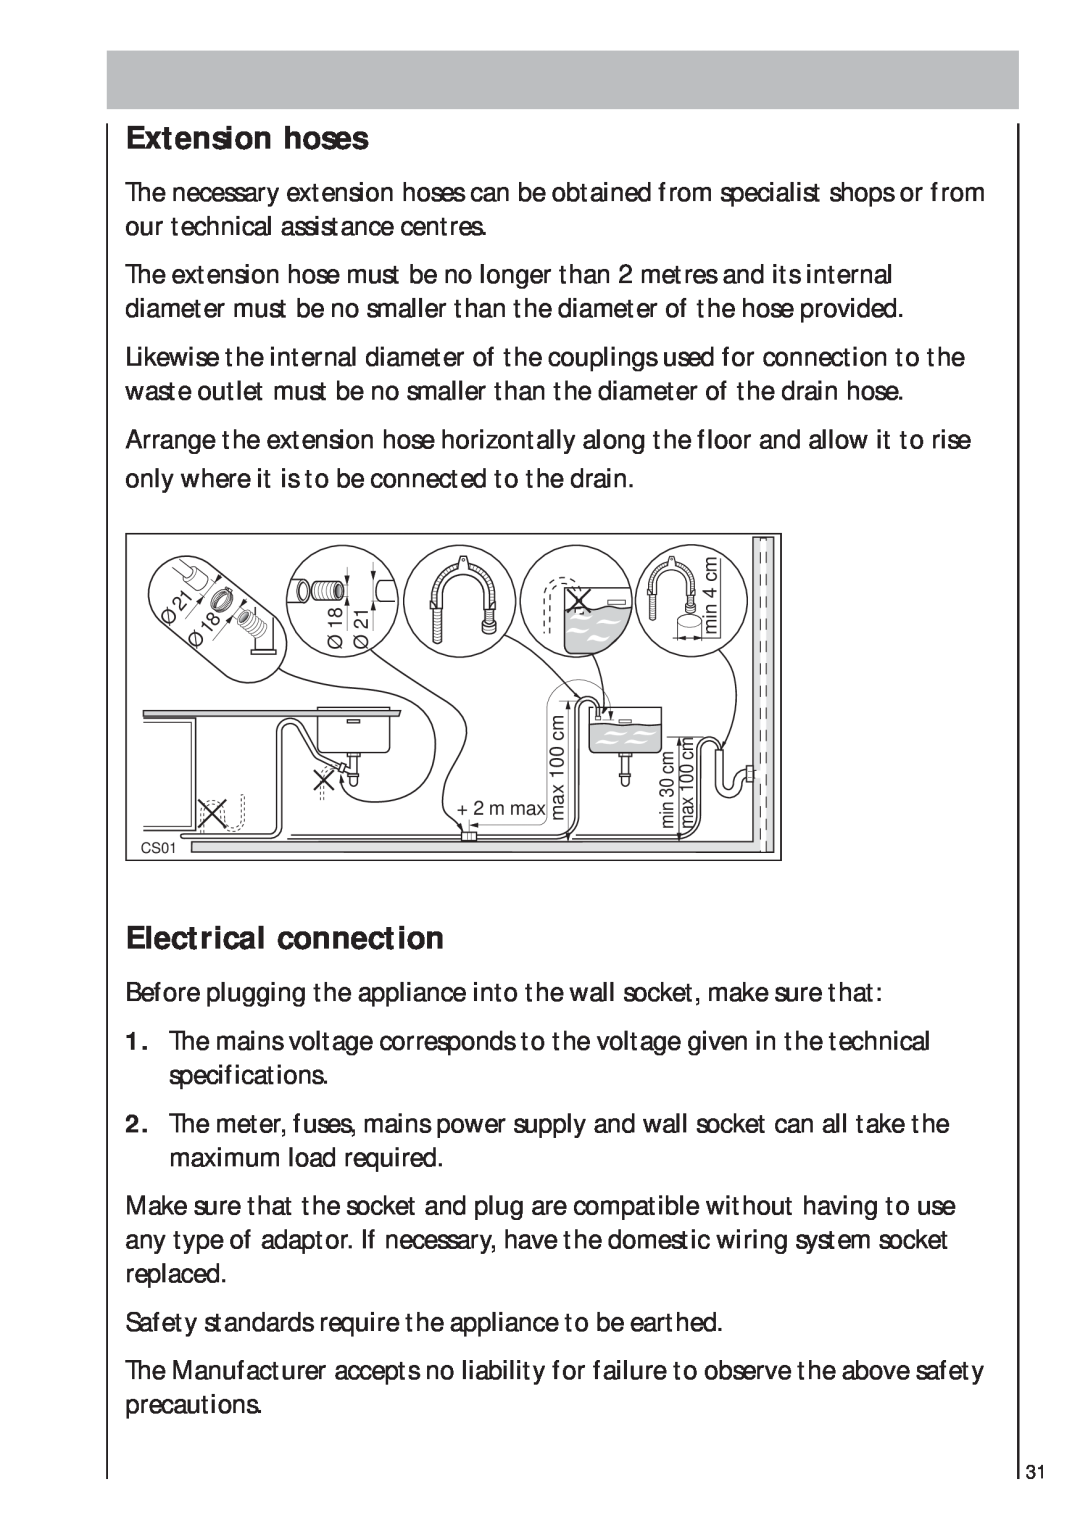 AEG 403 manual Extension hoses, Electrical connection 